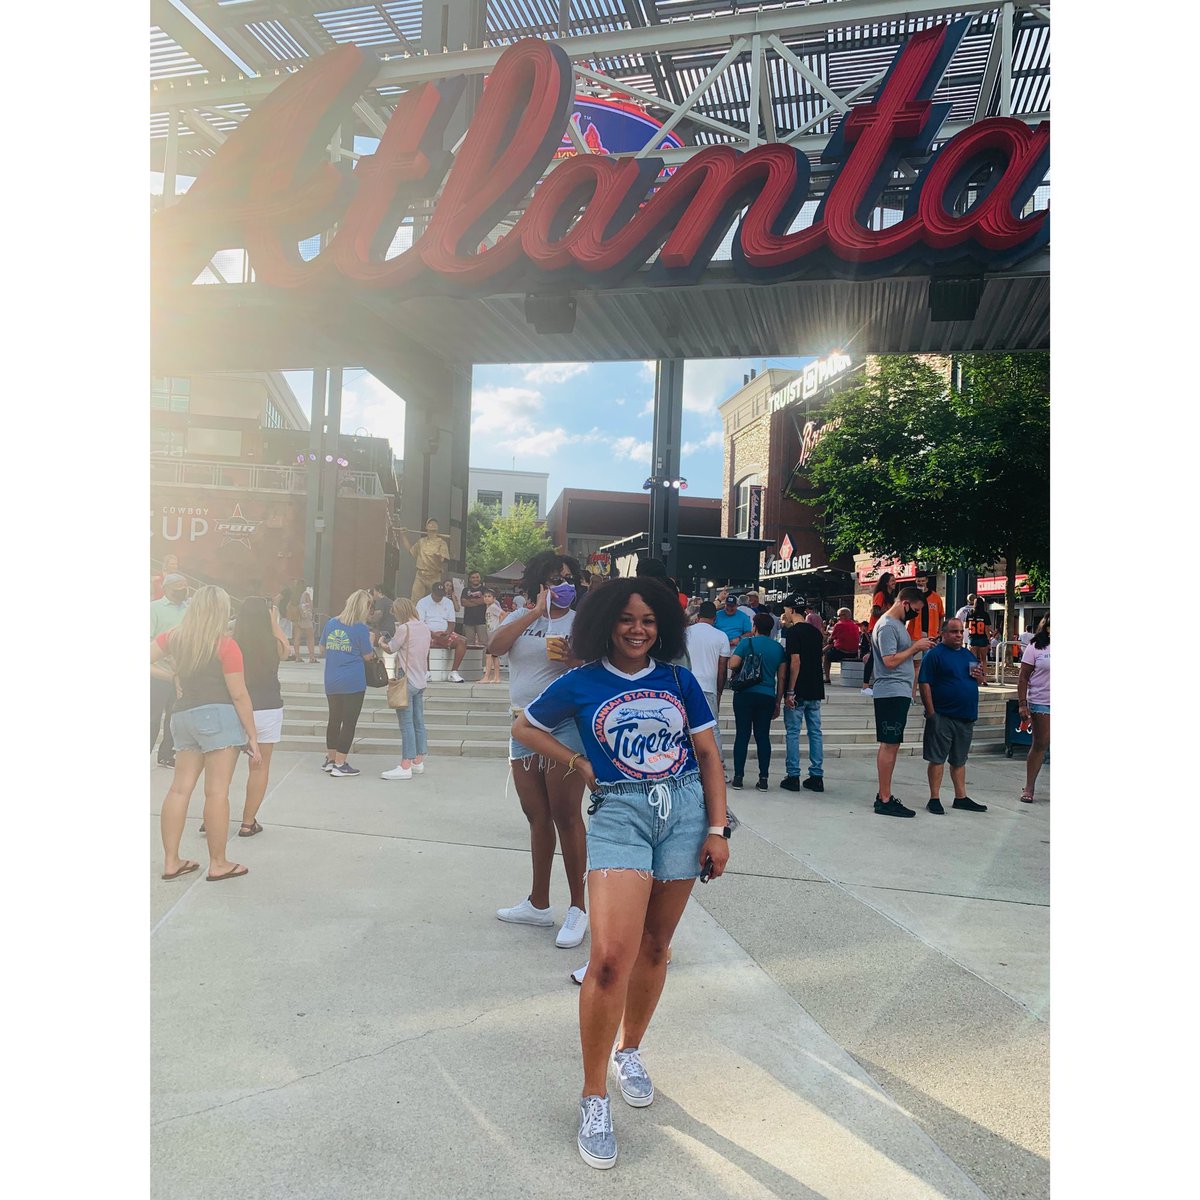 Hardly home but always reppin’ 🐅🧡💙 #HBCUNight